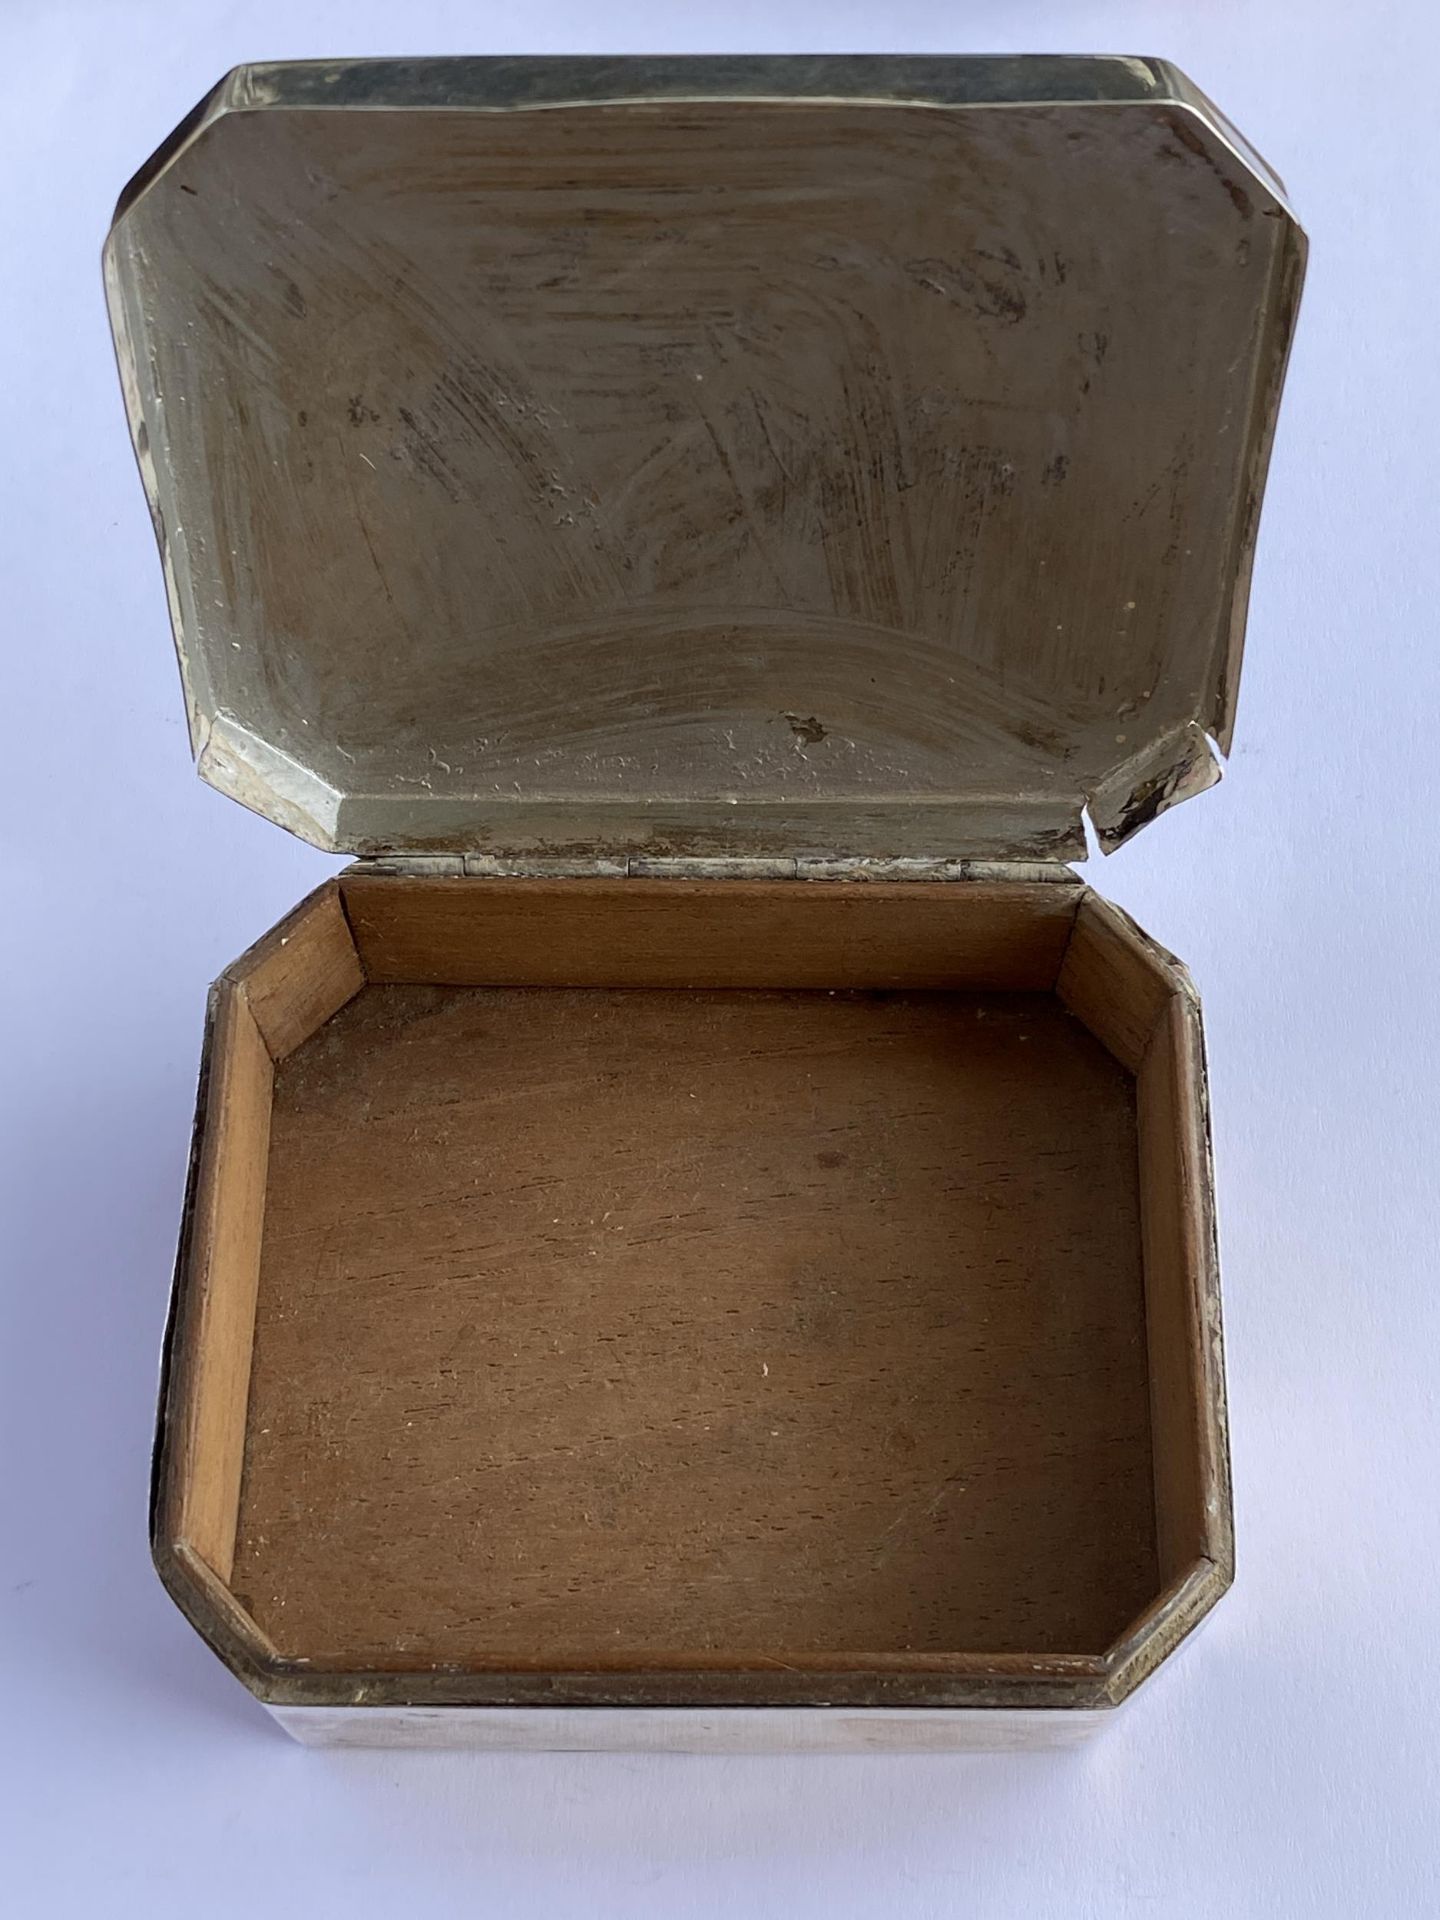 AN ART DECO HALLMARKED SILVER CIGARETTE BOX WITH WOOD LINING, GROSS WEIGHT 249 GRAMS - Image 7 of 10